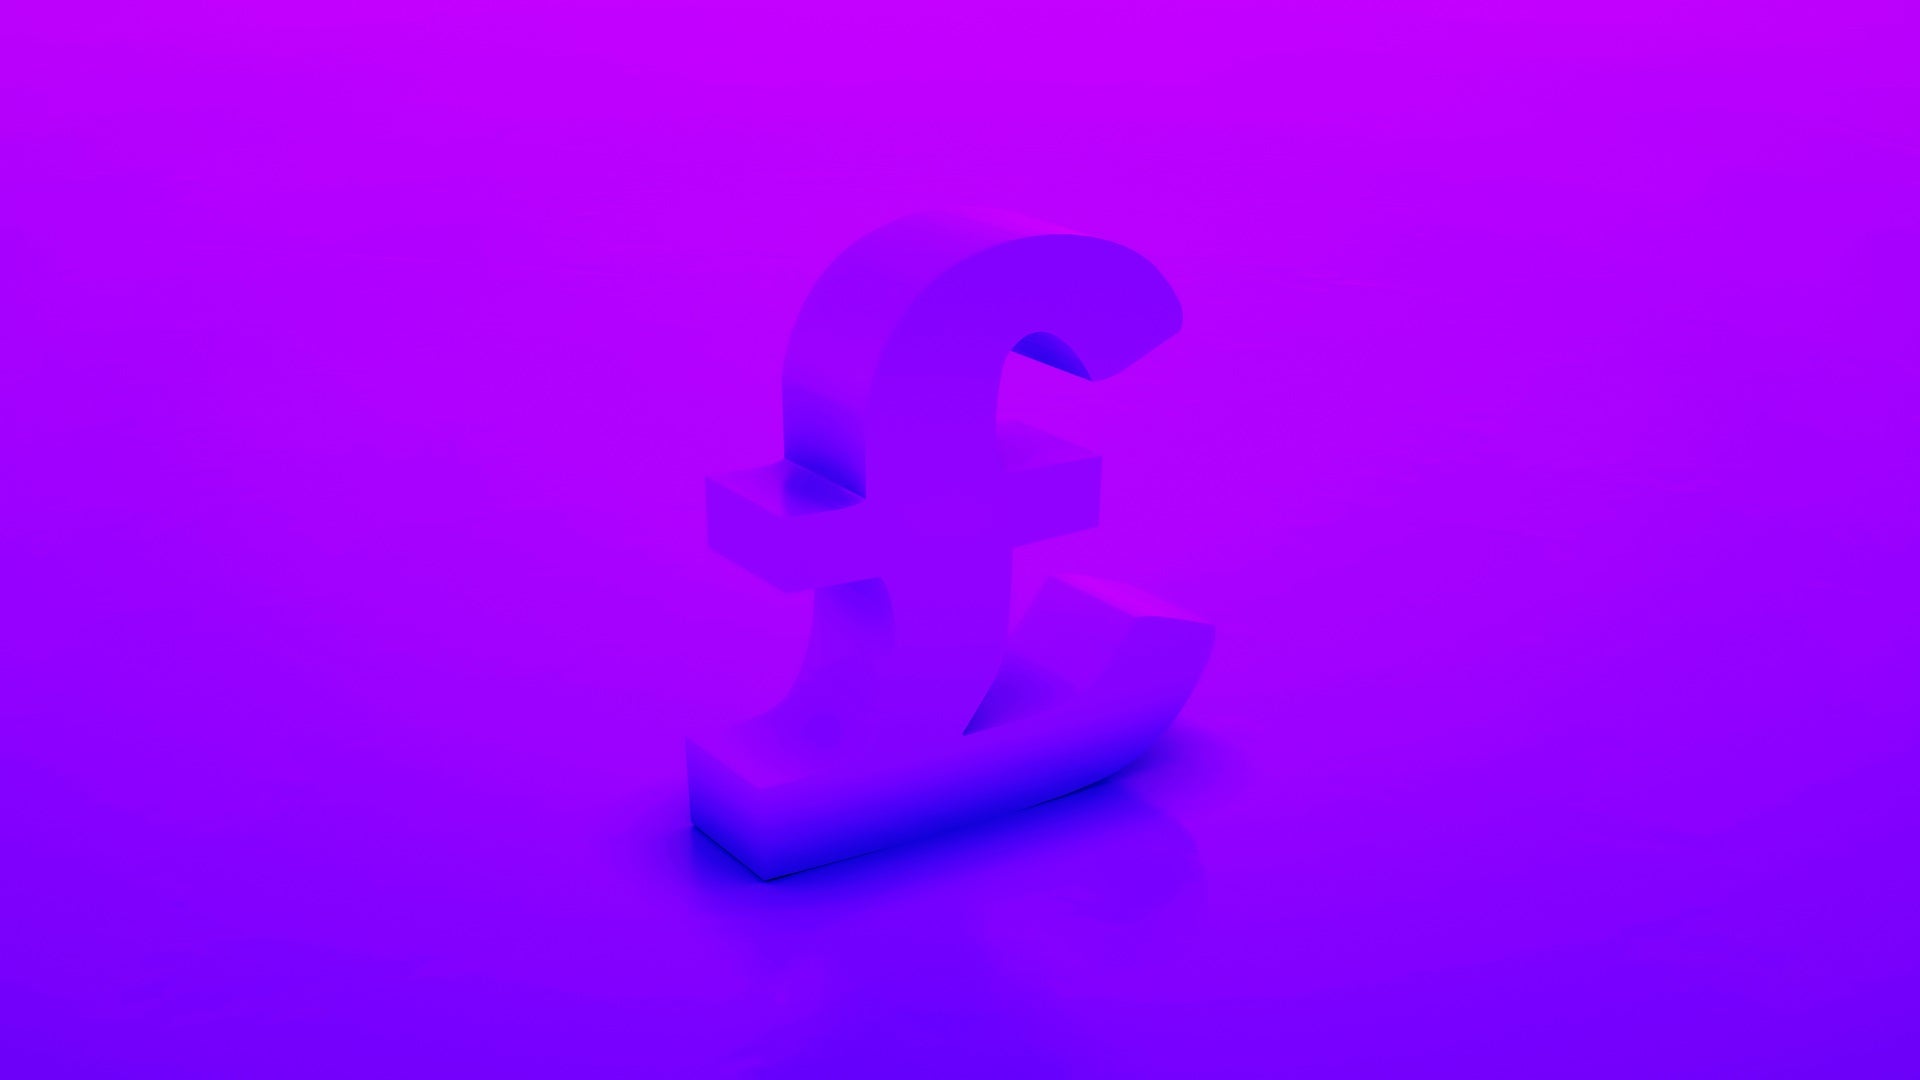 Pound symbol isolated on purple color background. 3d illustration.